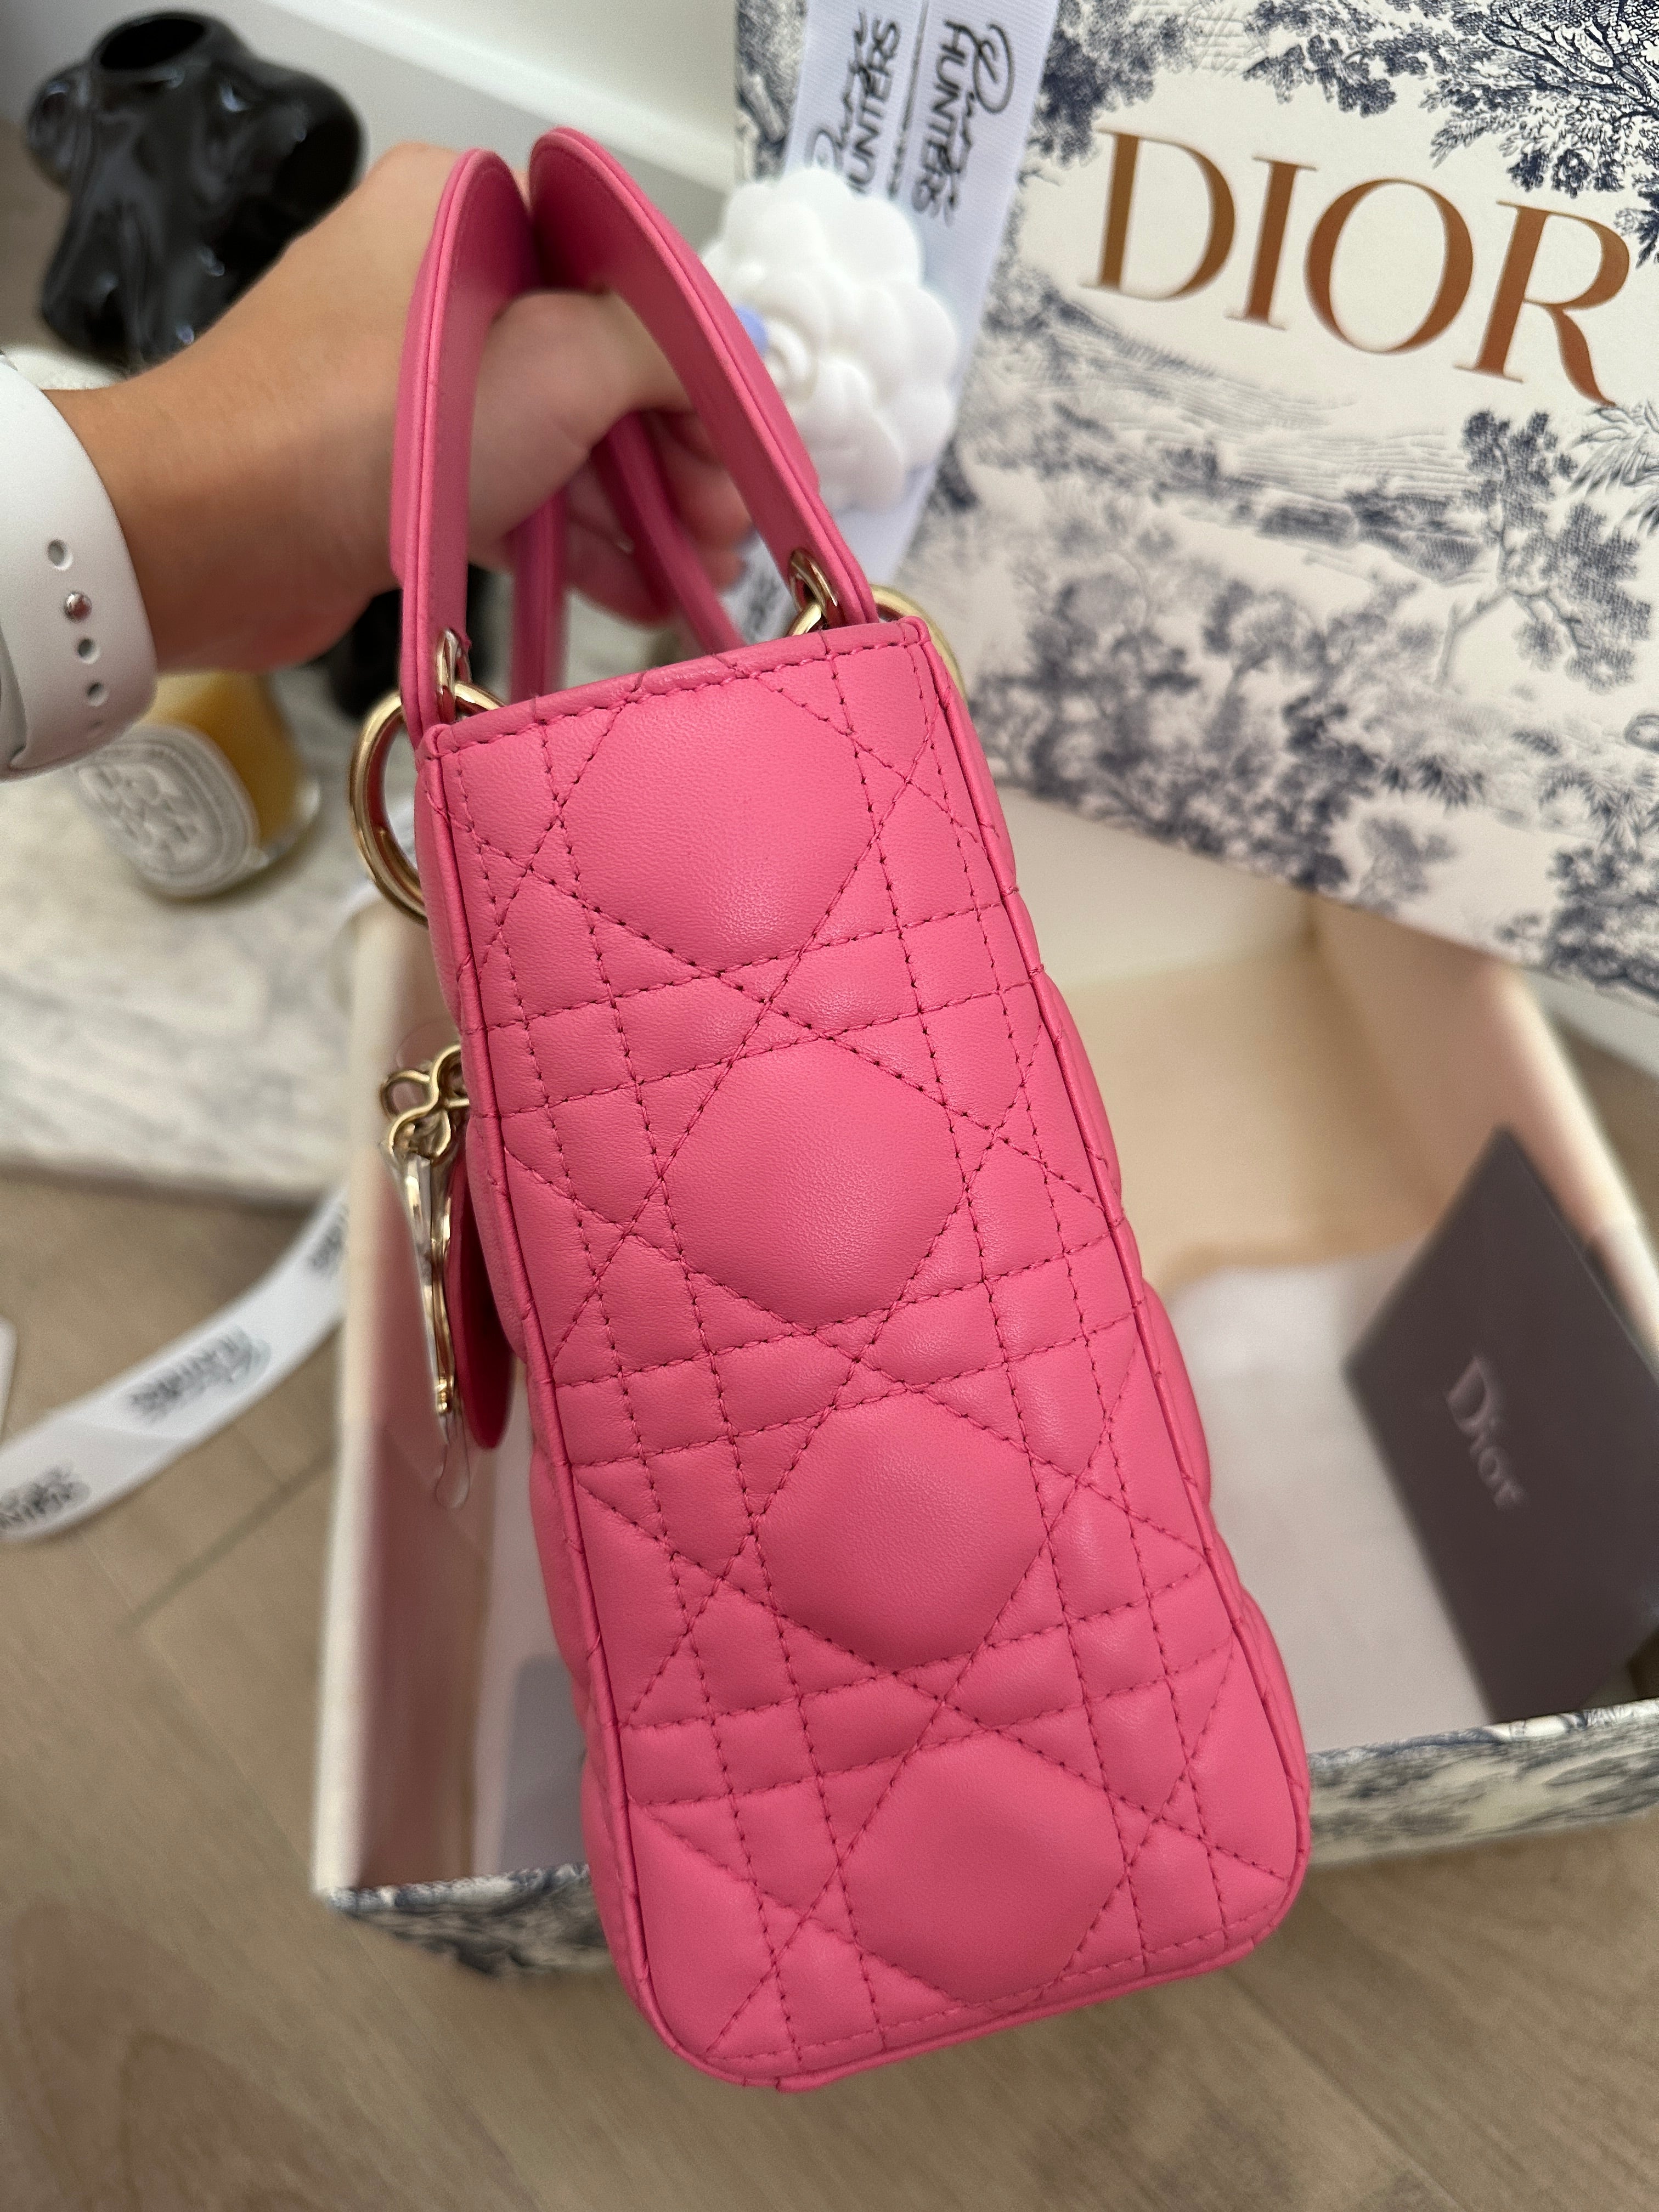 100% authentic DIOR Lady Dior Small in Pink Lambskin with GHW